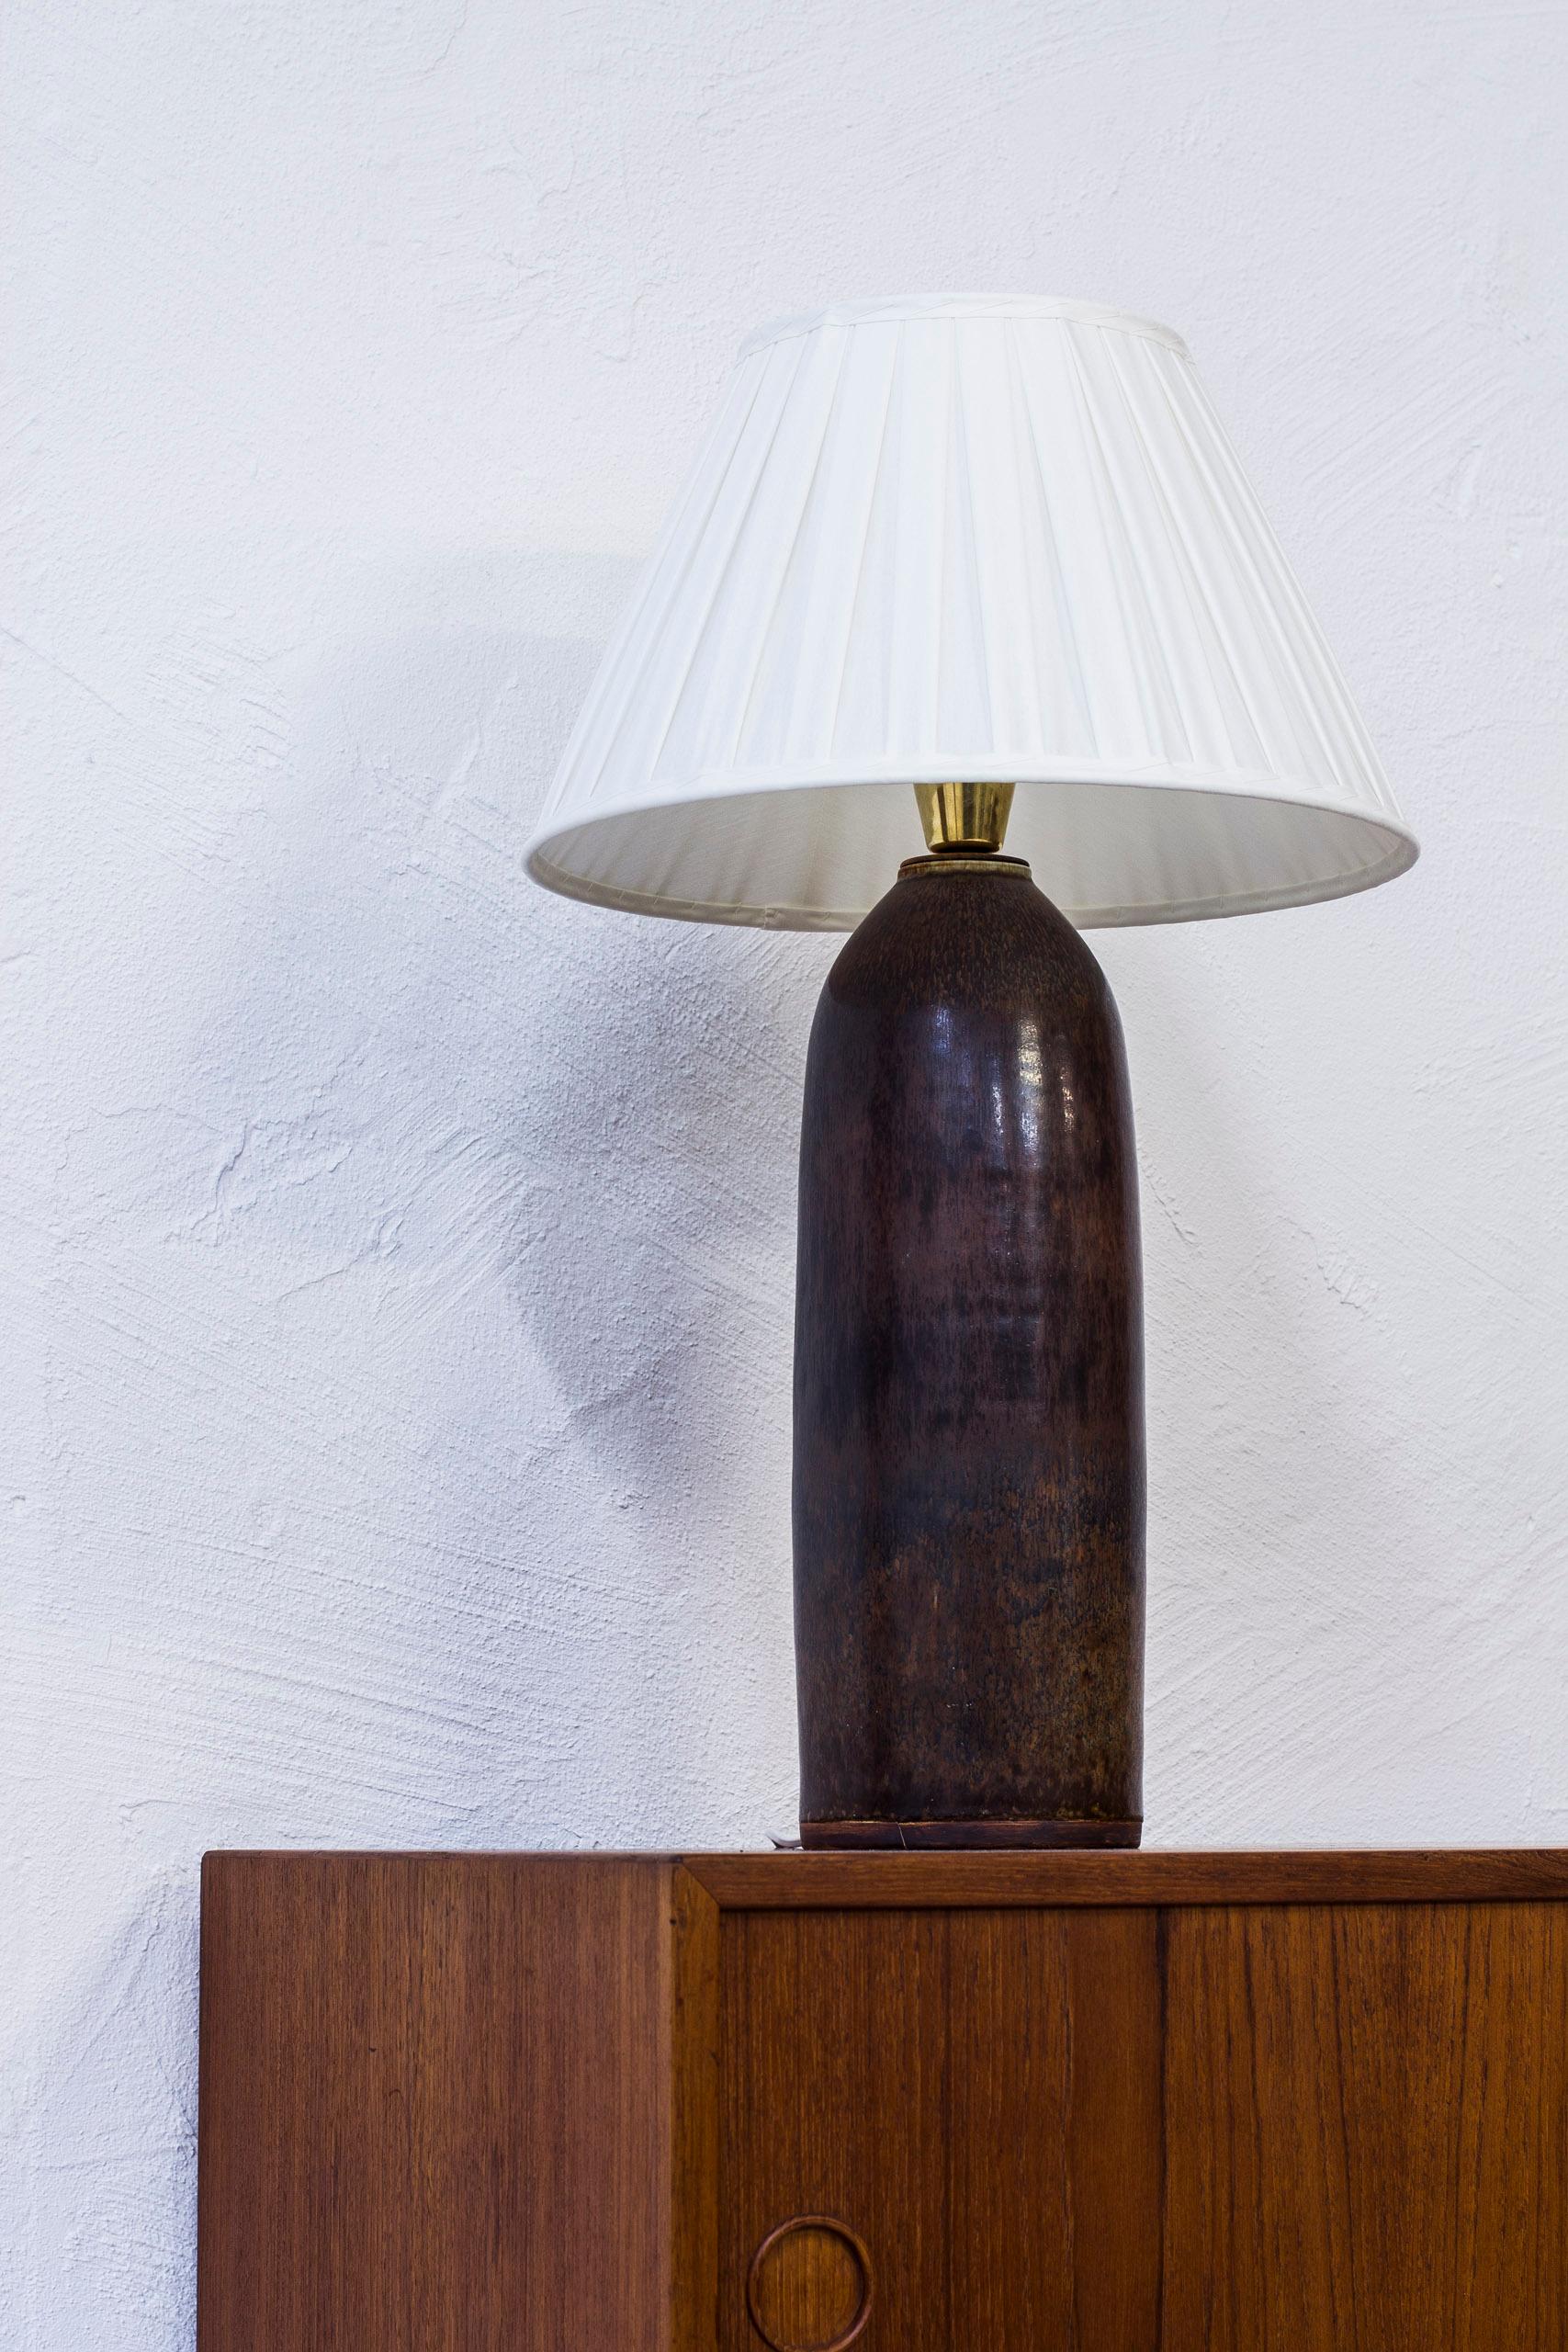 Table lamp designed by Carl-Harry Stålhane. Produced by hand at Rörstrand during the 1950s. Blue, grey glaze with hints of purple. Brass fitting on the top. With new hand-sewn, pleated chintz lampshade. Excellent condition with light age related